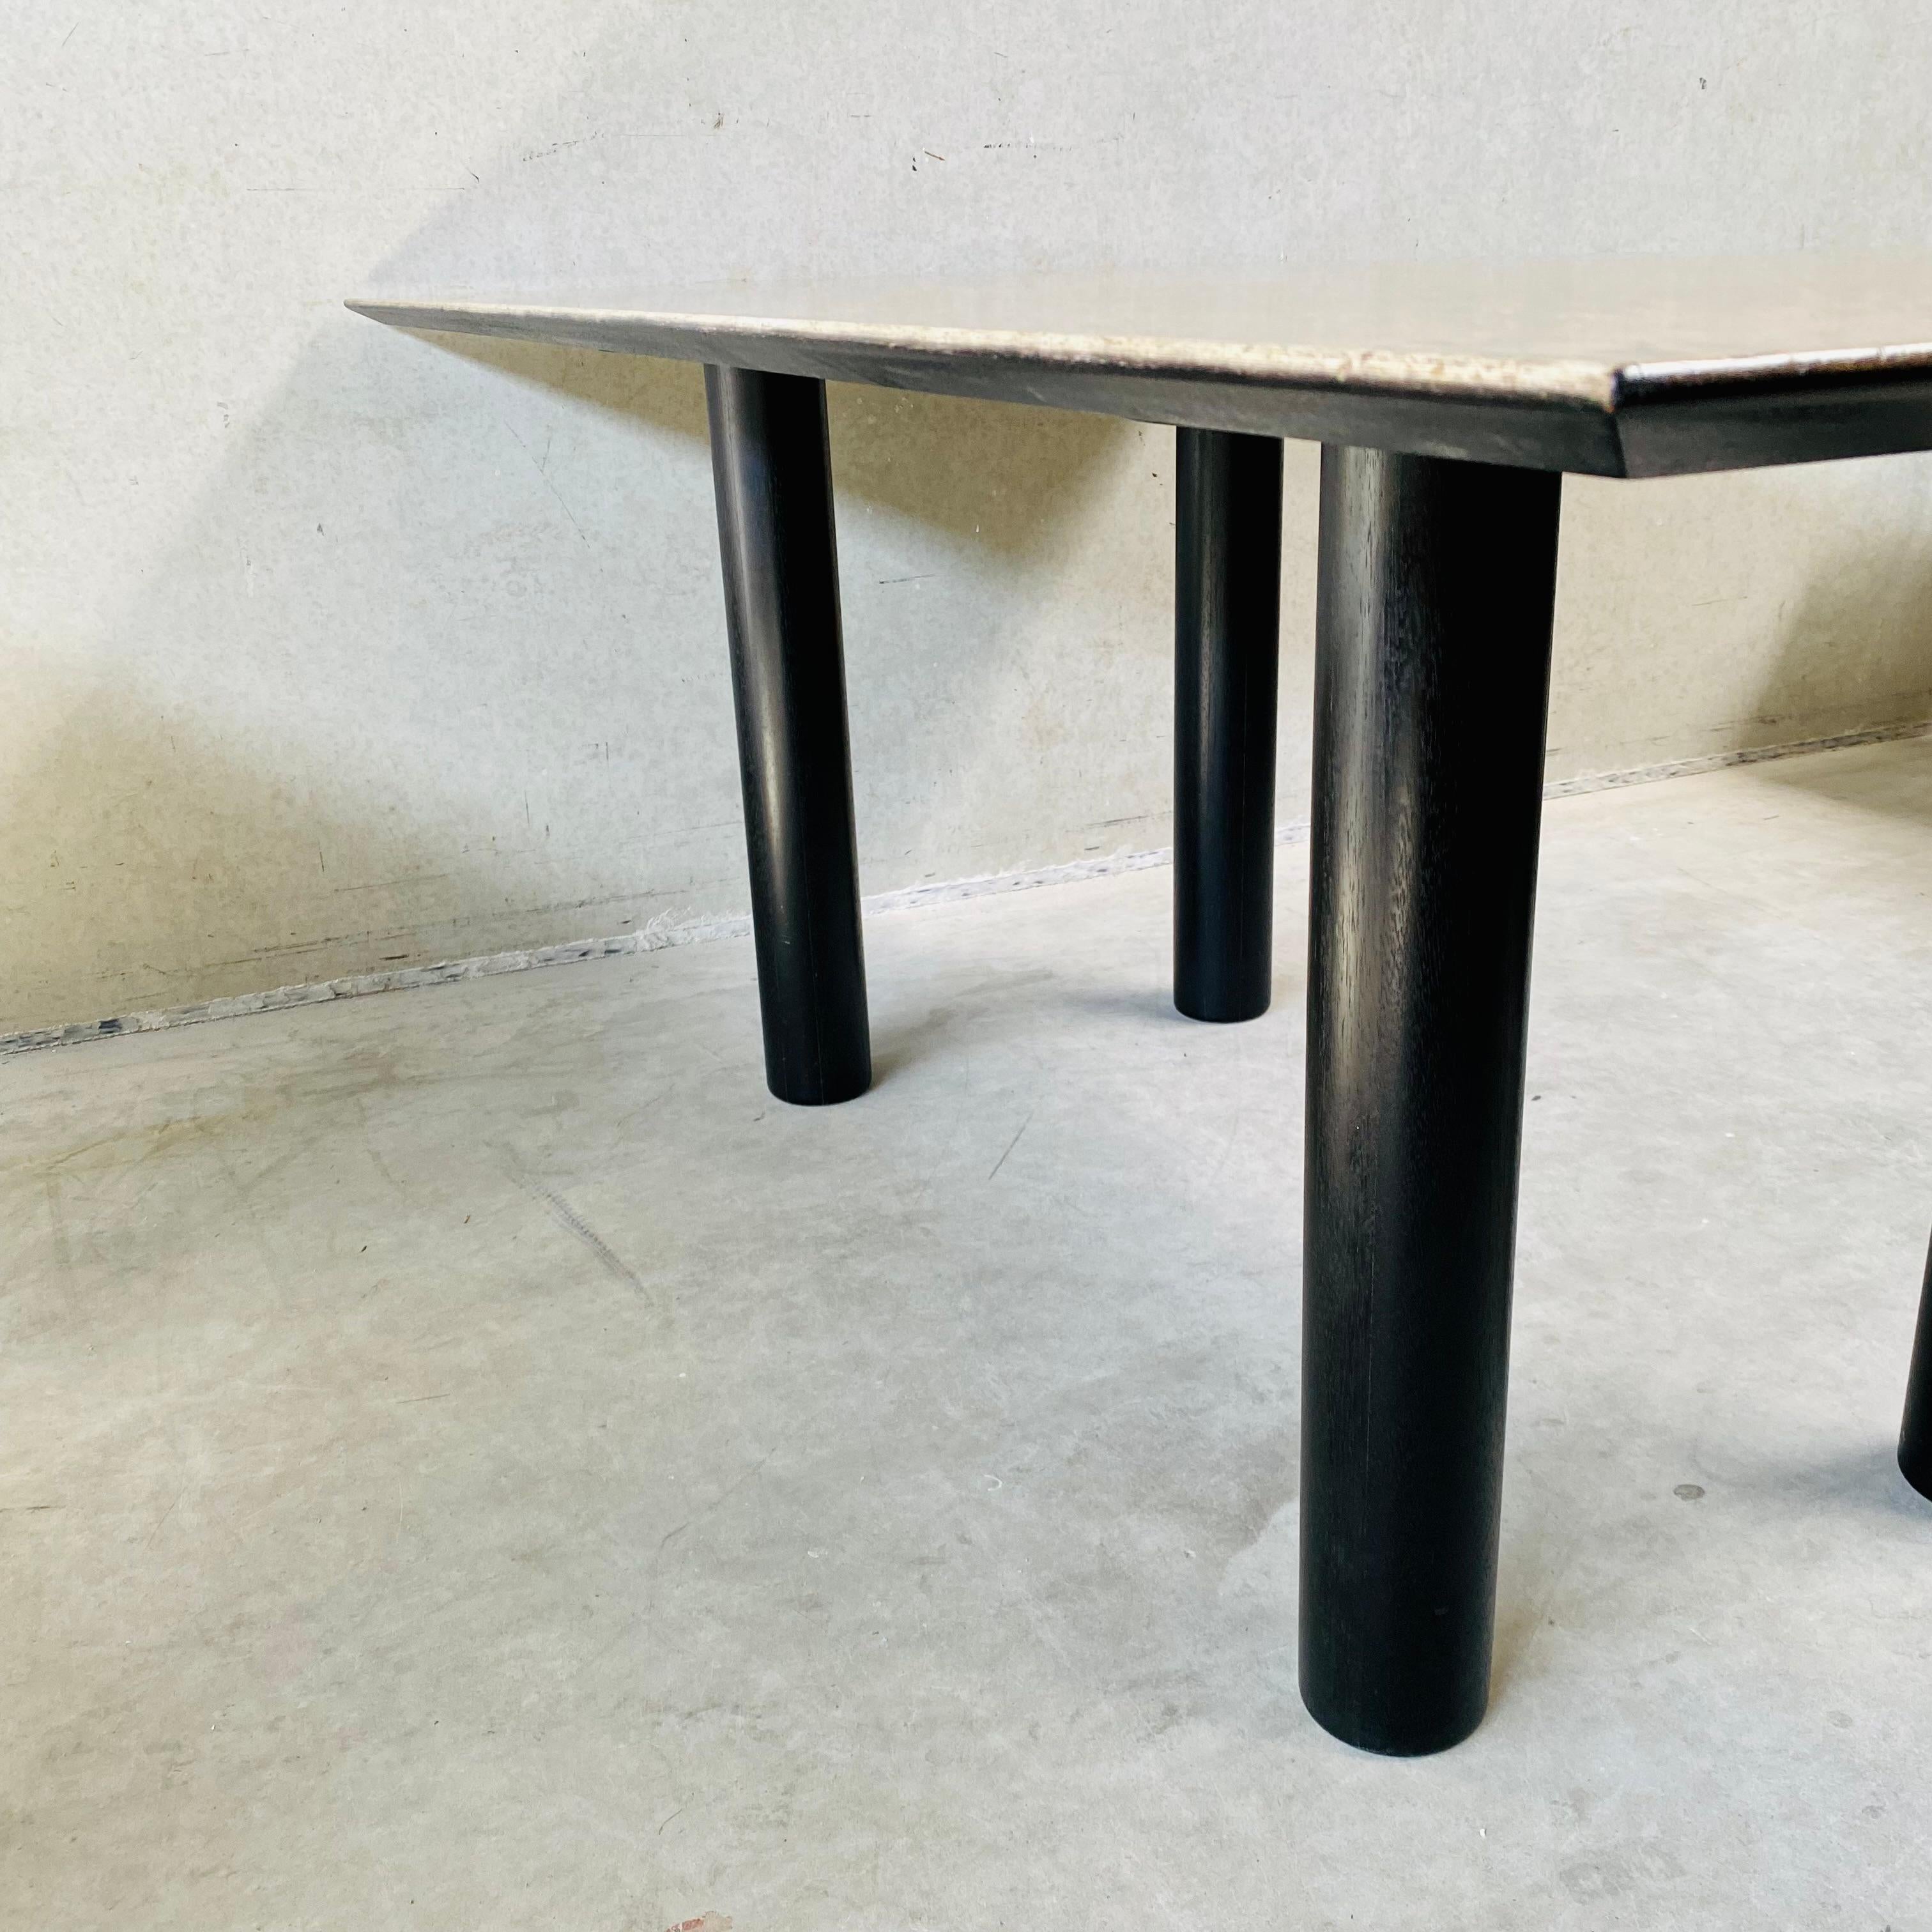 Late 20th Century Dining room table by Hans Eichenberger for Röthlisberger, Switzerland 1980s